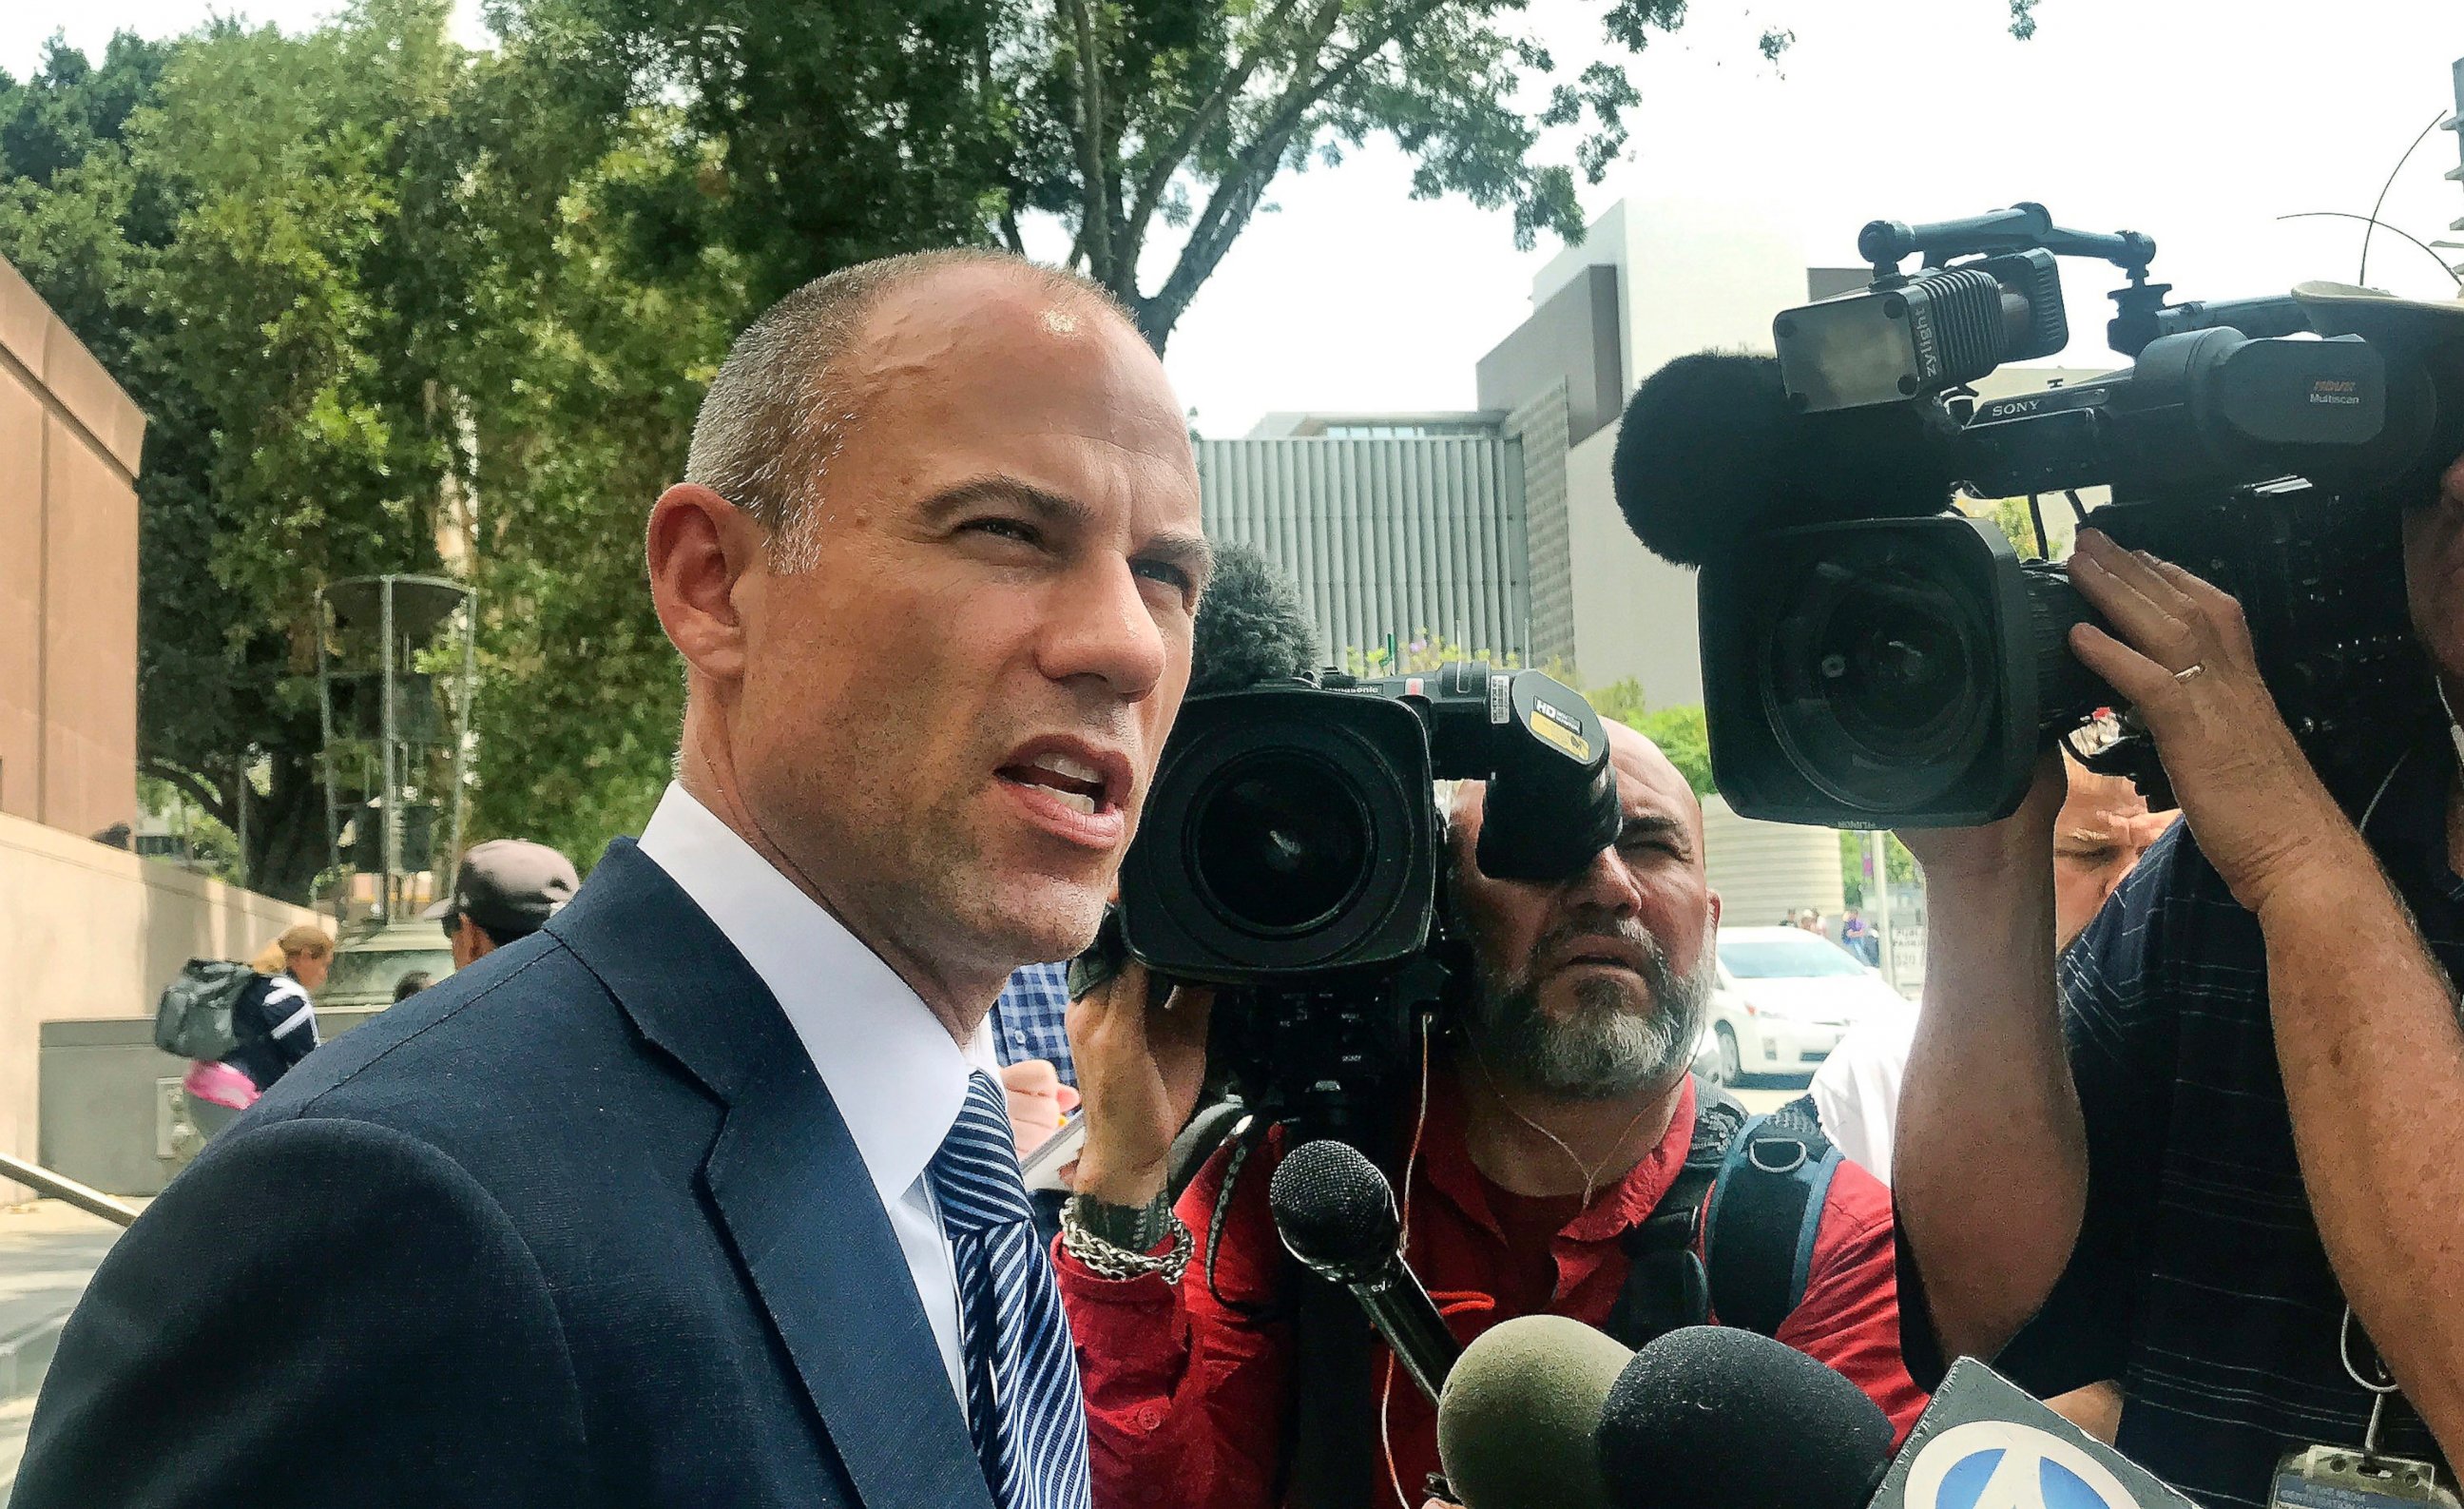 Porn actress Stormy Daniels' lawyer Michael Avenatti talks to the media outside of Los Angeles County Superior Court after a hearing in Los Angeles Tuesday, July 10, 2018. 